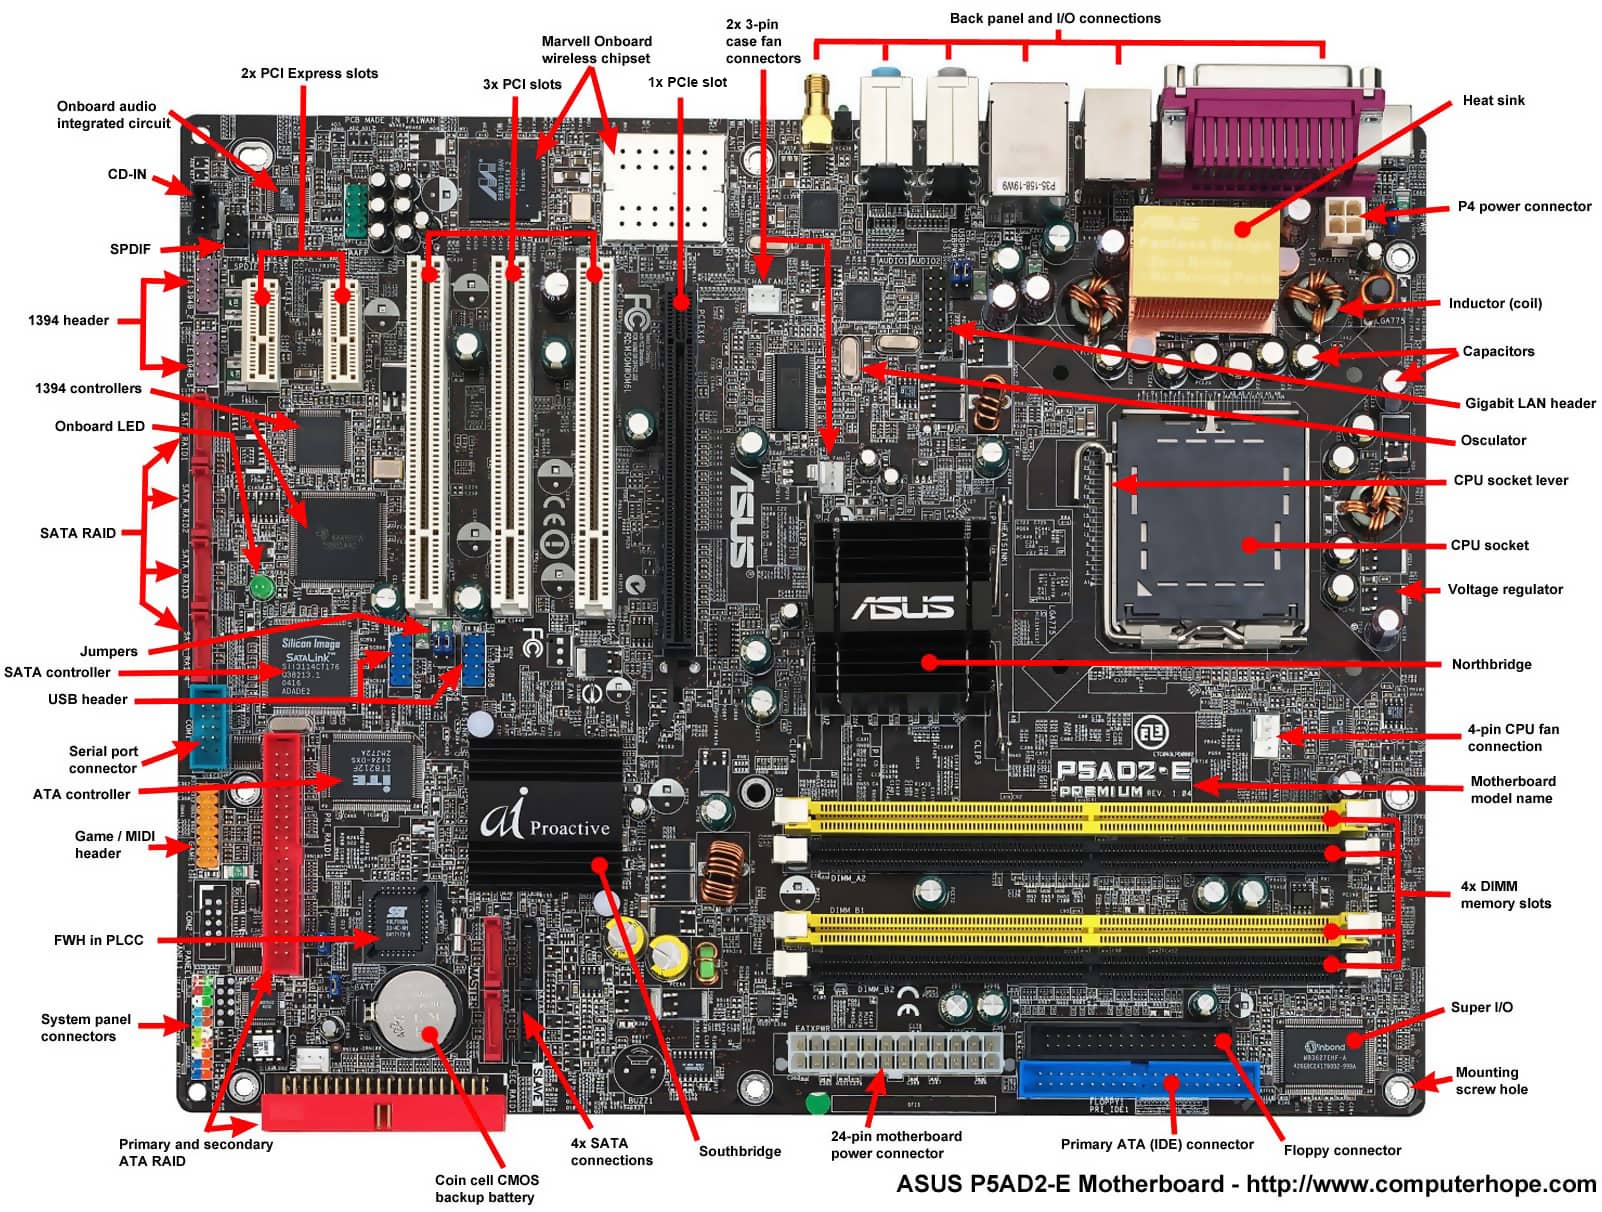 The Complete guide of Motherboard and its parts